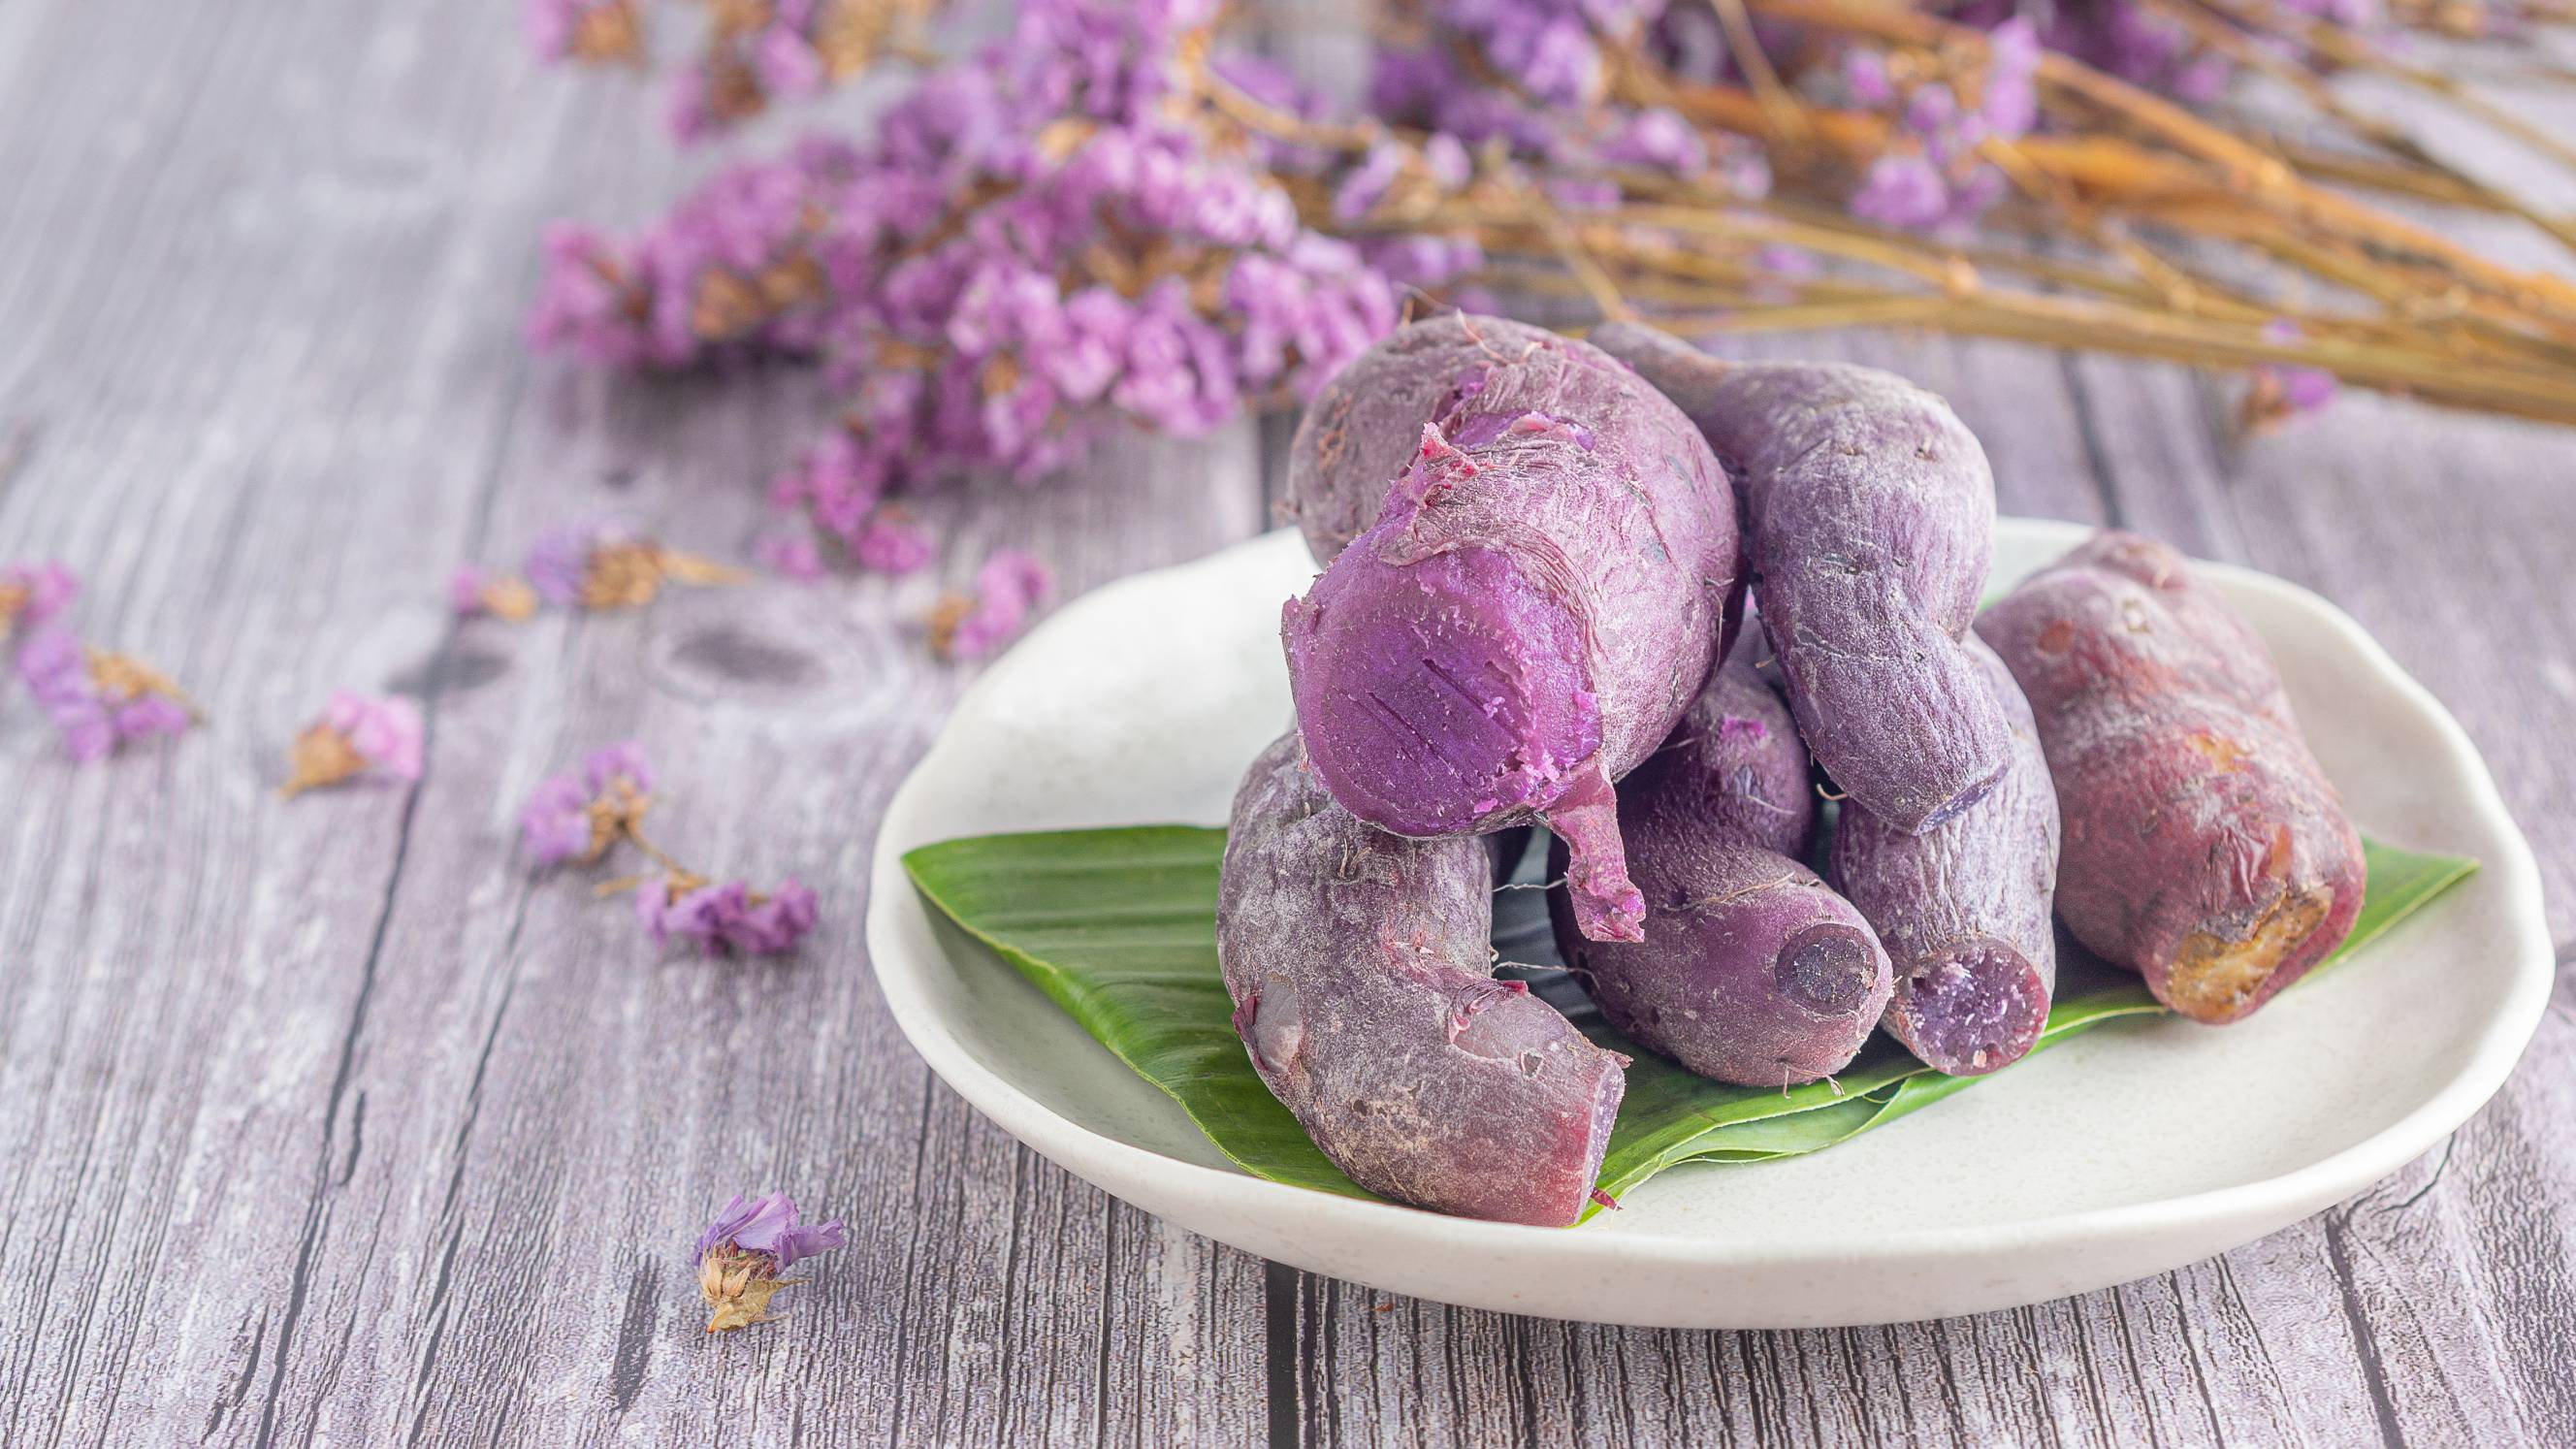 Ripe purple yam on a plate on a wooden table